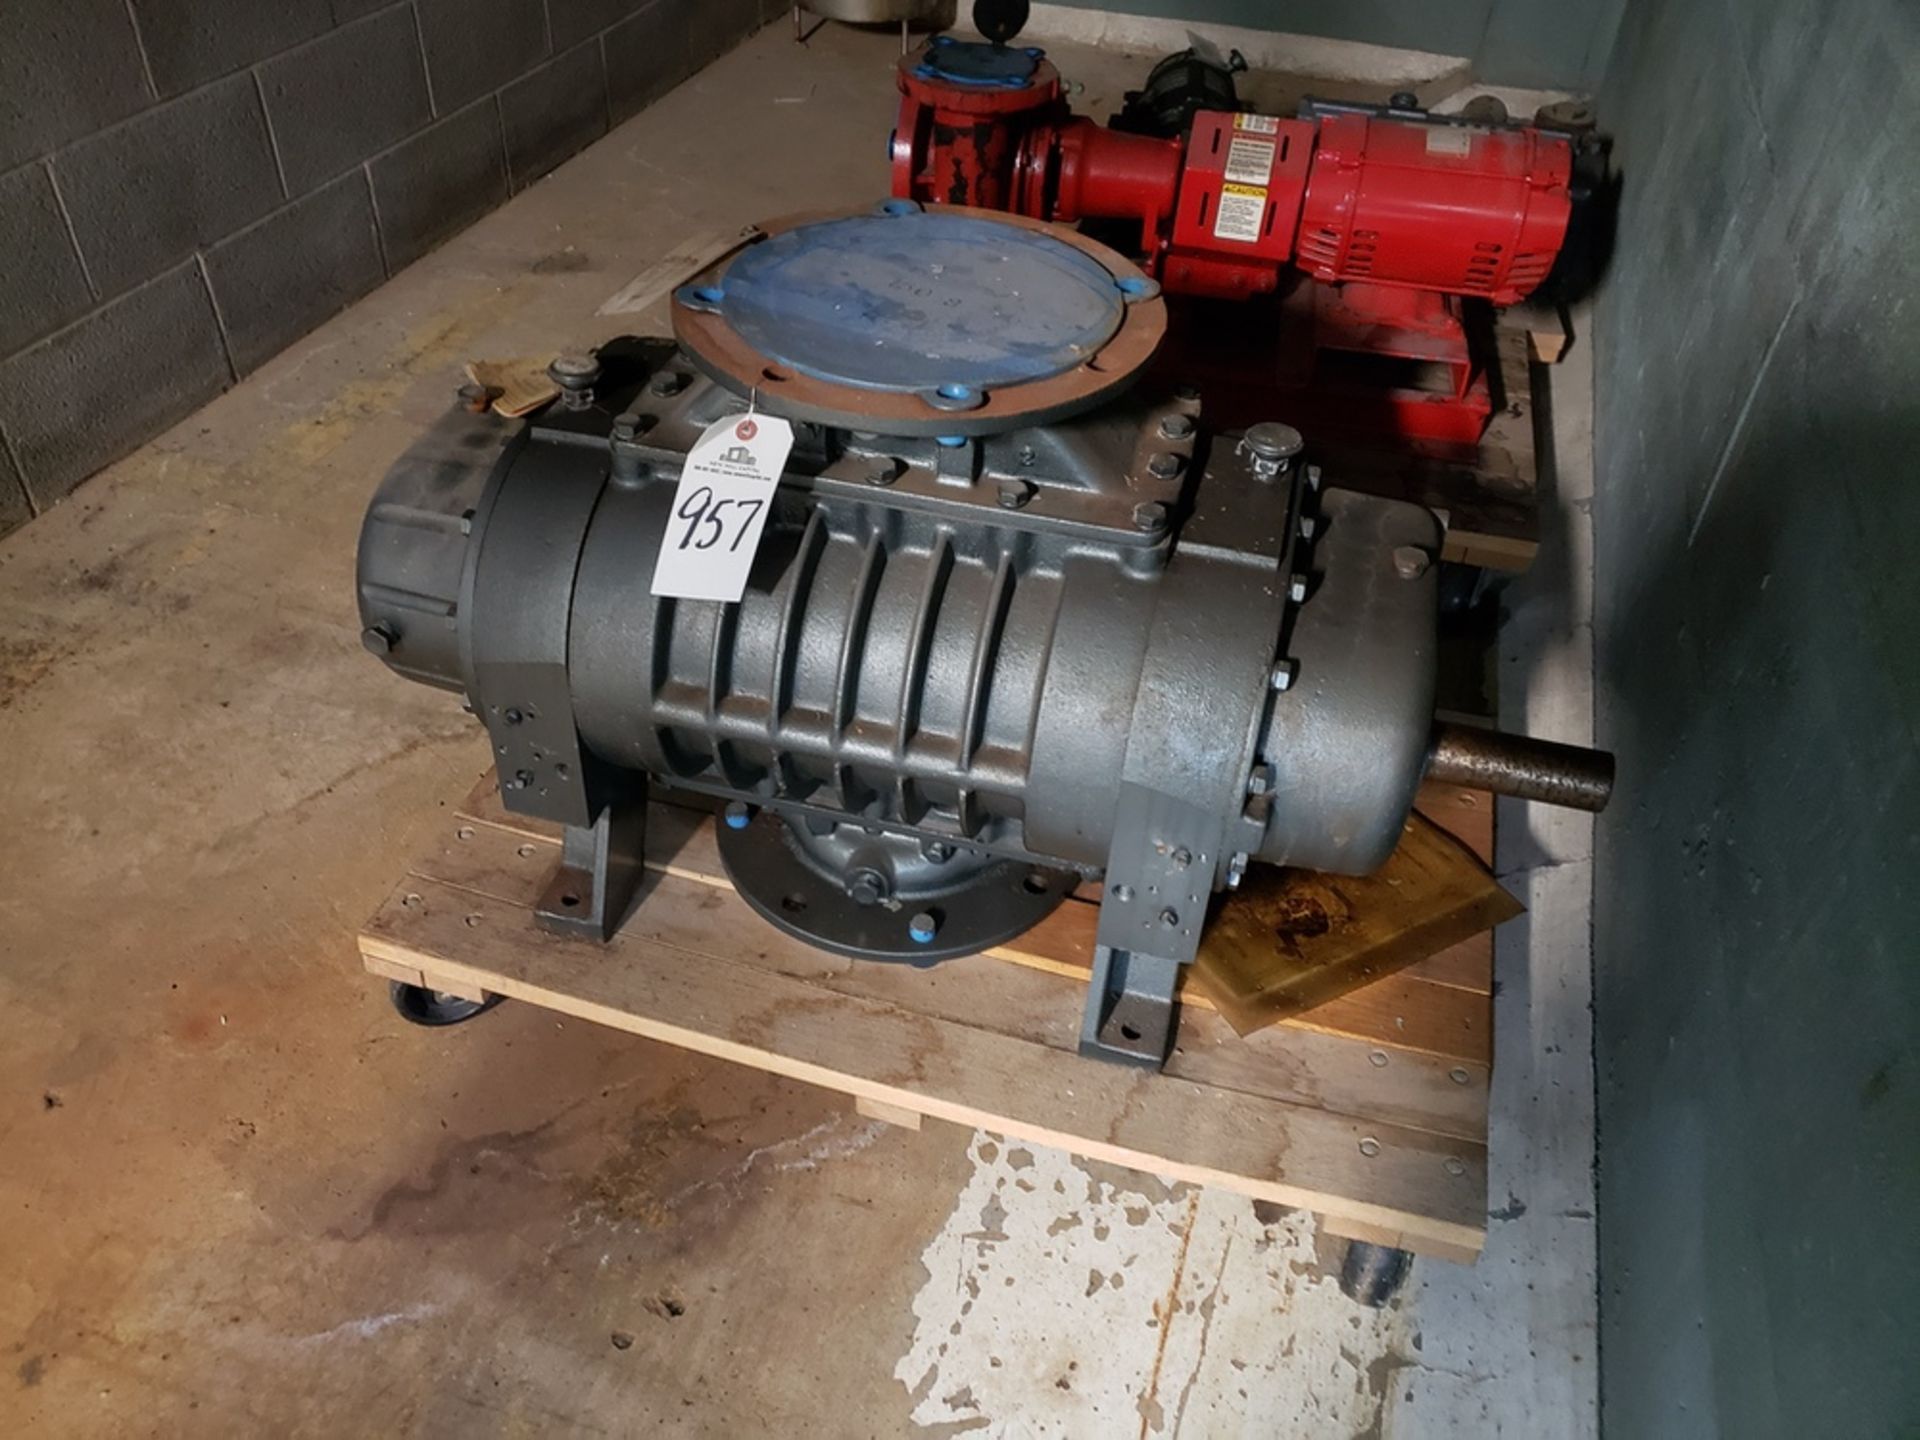 Tuthill Rotary Positive Displacement Blower, M# SS16-4613 - Subject to Bulk Bid Lot | Rig Fee: $75